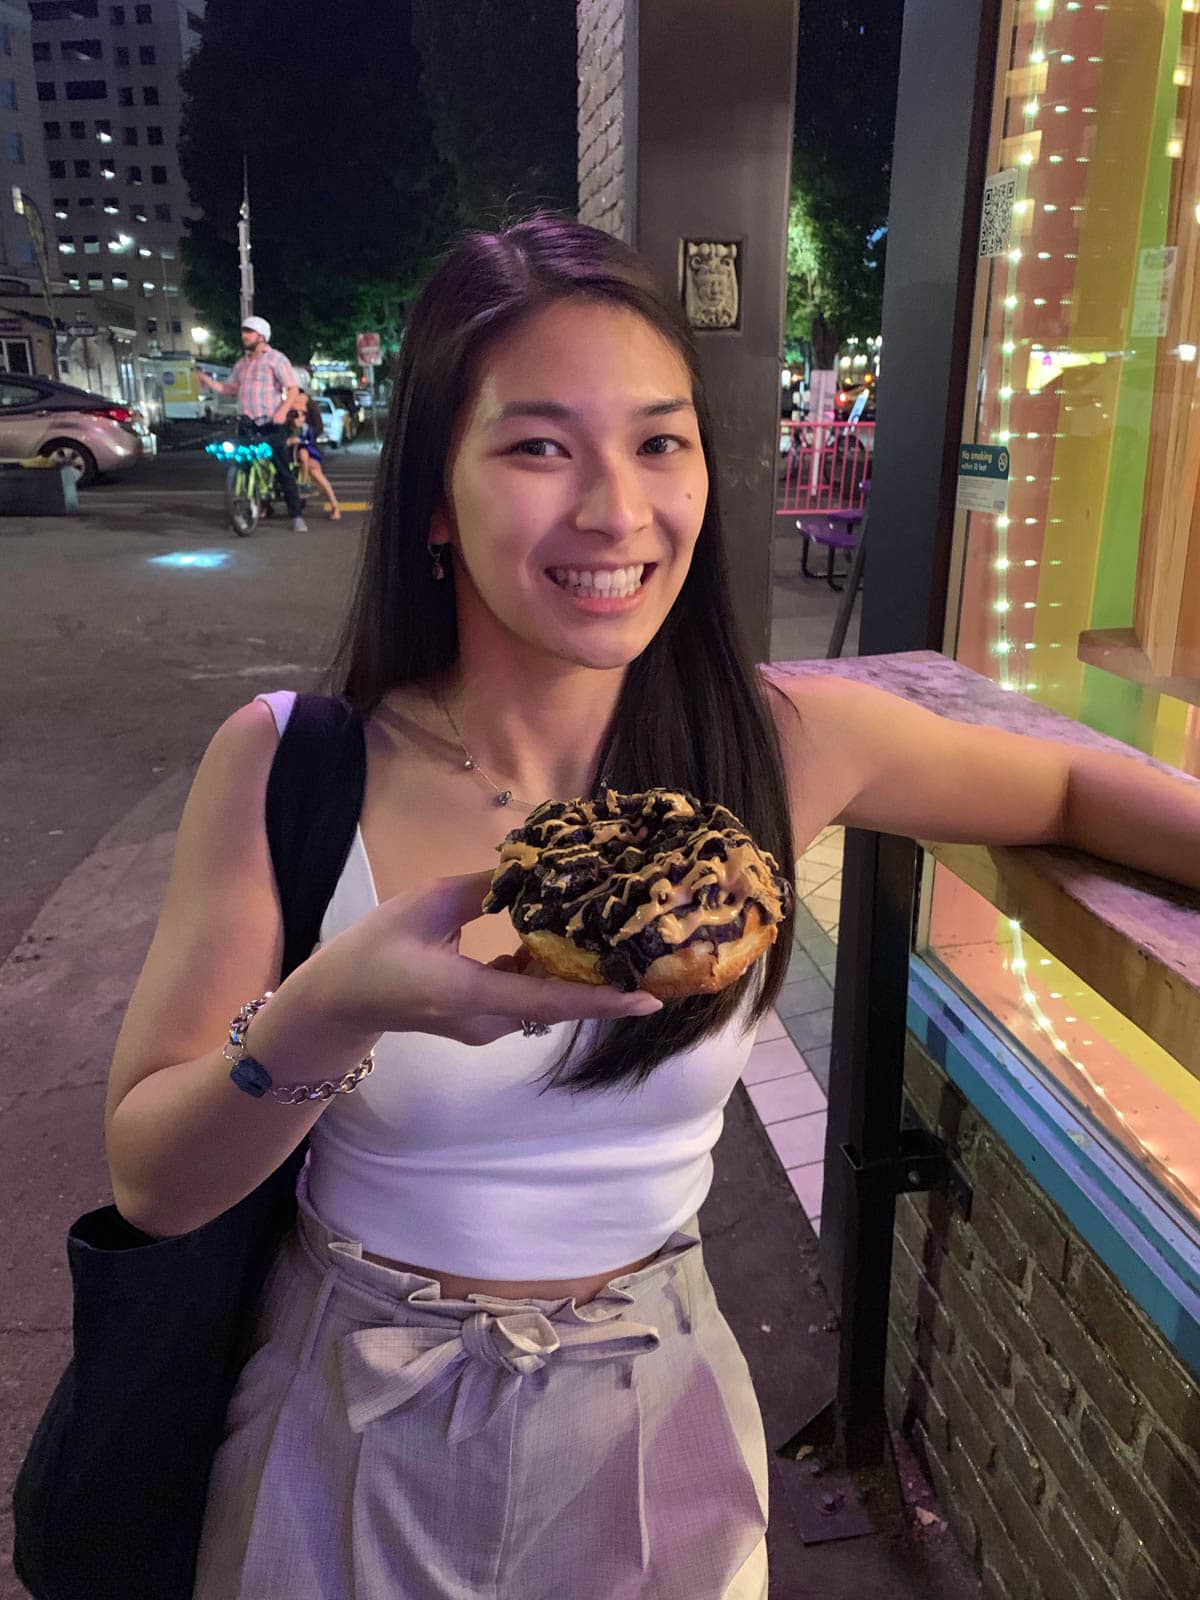 A woman with long dark hair, holding a doughnut topped with chocolate biscuits and peanut butter sauce